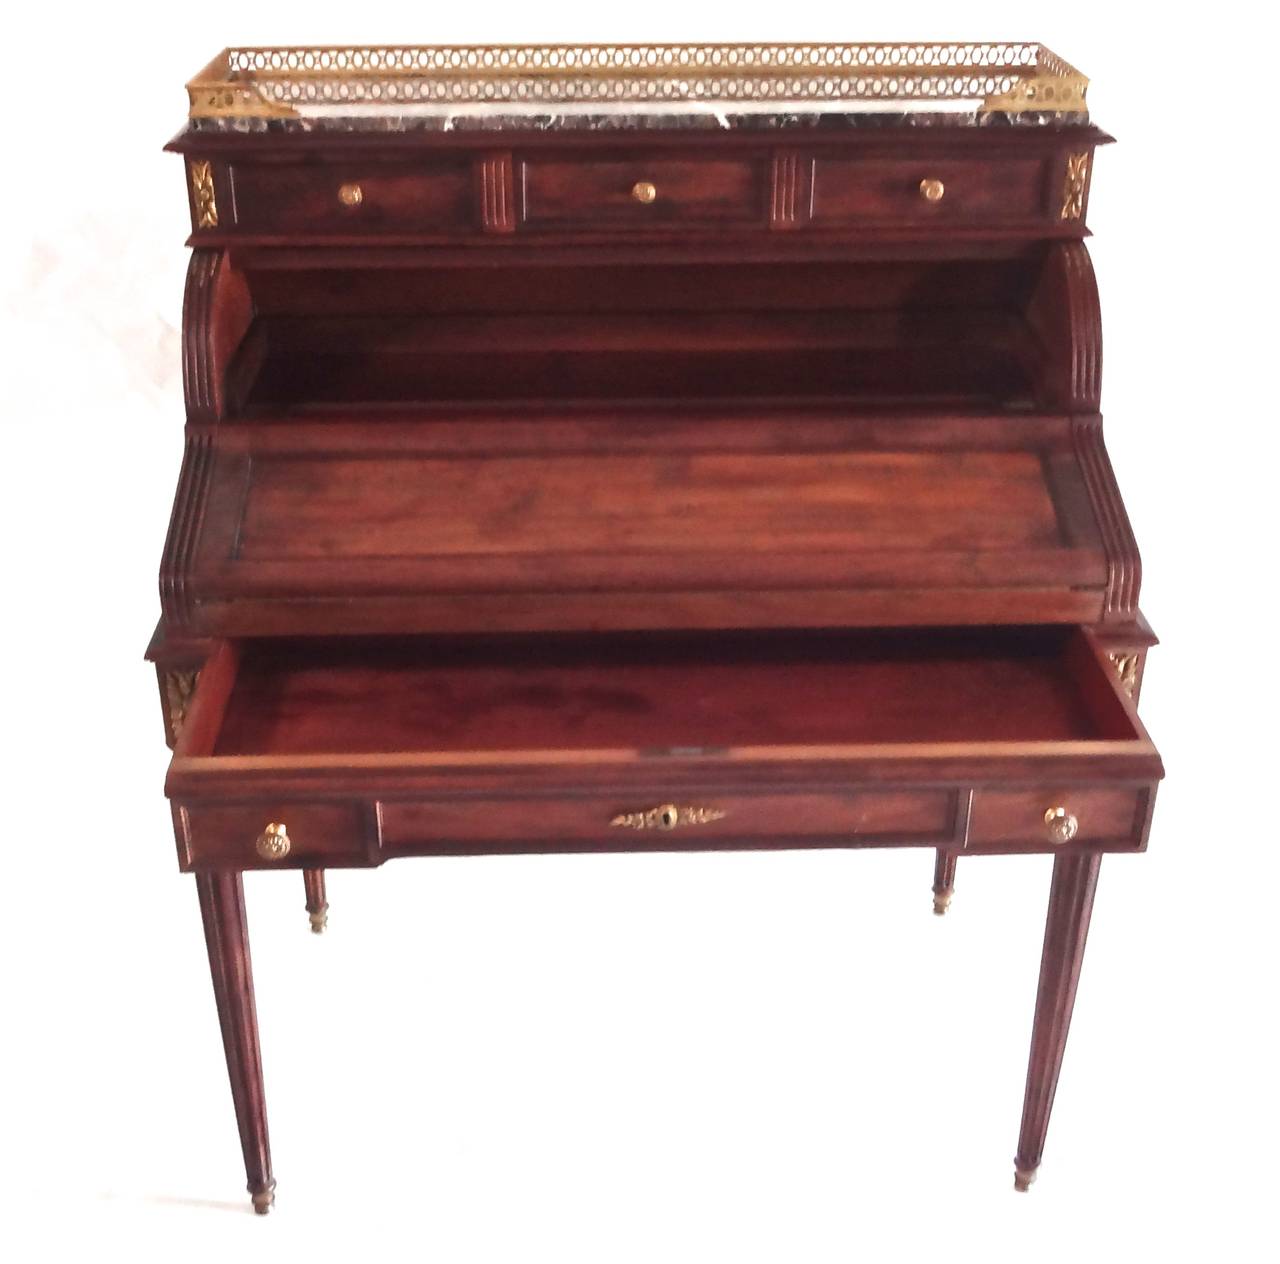 A French Louis XVI style mahogany mechanical cylinder writing desk with grey marble top, brass gallery and trim with 6 drawers. As the frieze drawer opens it triggers the opening of the mechanical writing surface covered in green felt blotter with